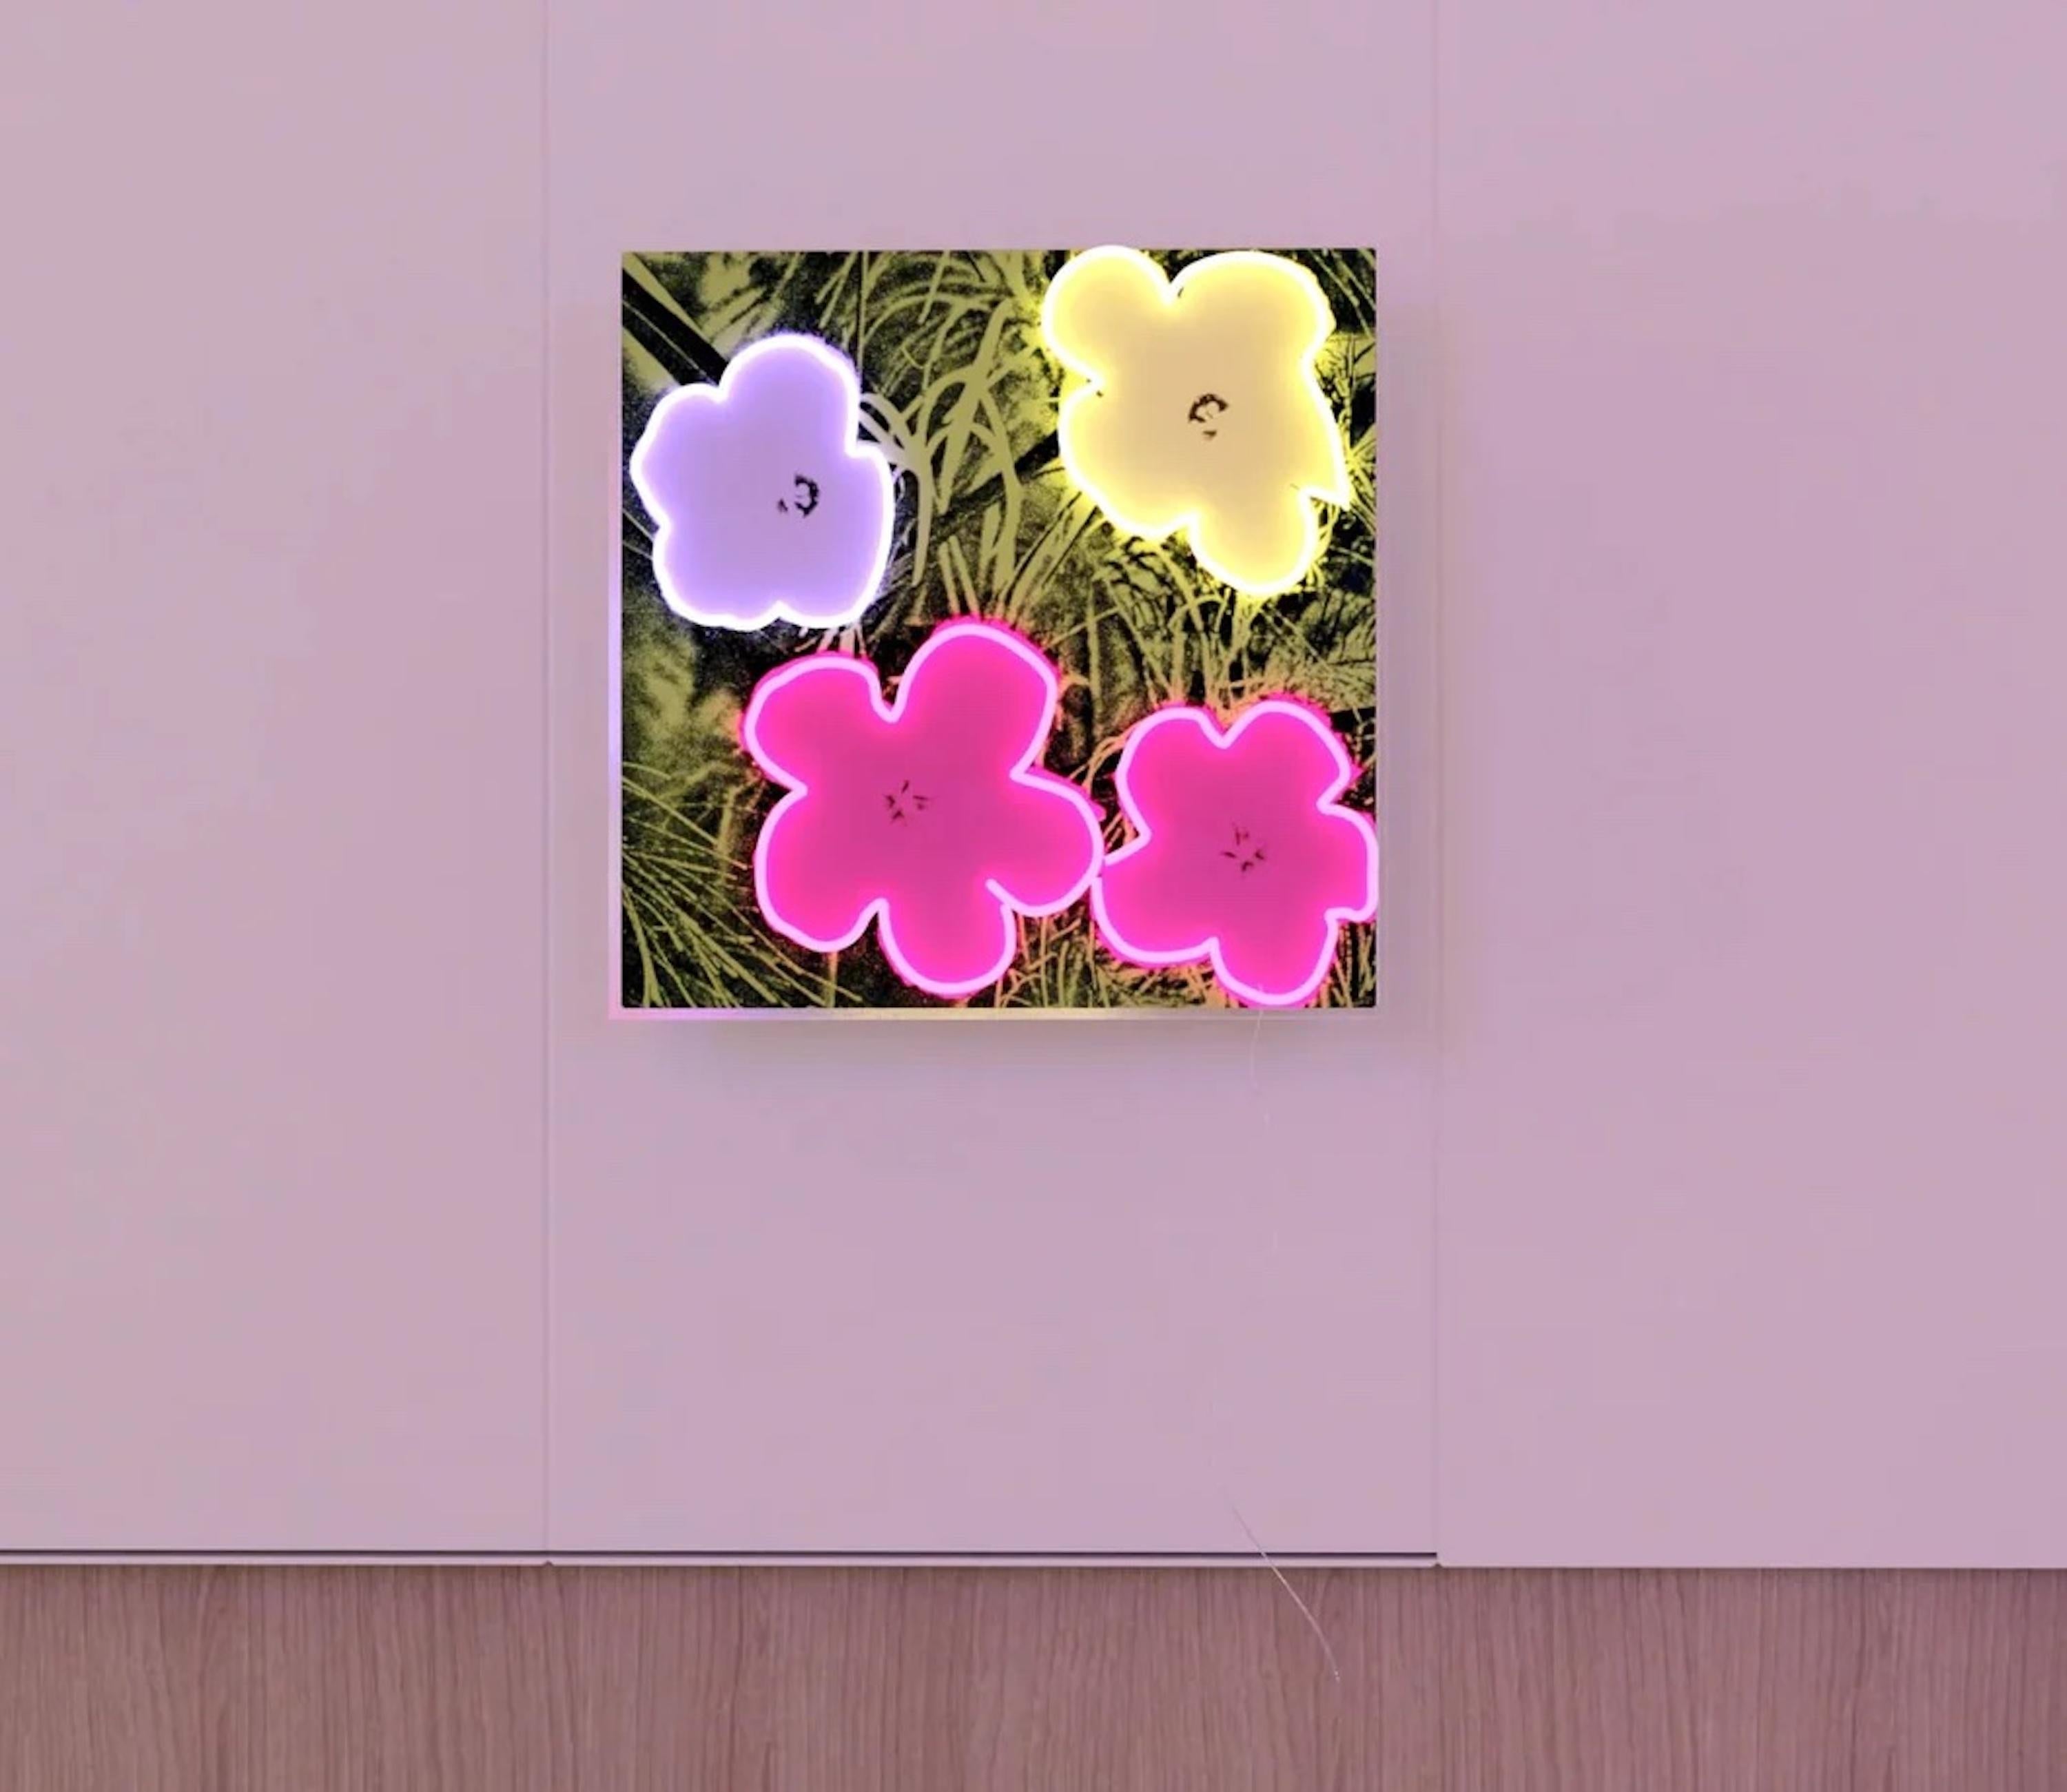 Yellowpop after Andy Warhol
Neon Flowers lighted Wall Hanging/Sign, 2022
Neon flex material, consisting of PVC or Silicon piping with LED lights mounted on a recycled acrylic board
Edition 258/500 (numbered on COA)
Box is plate signed; accompanied